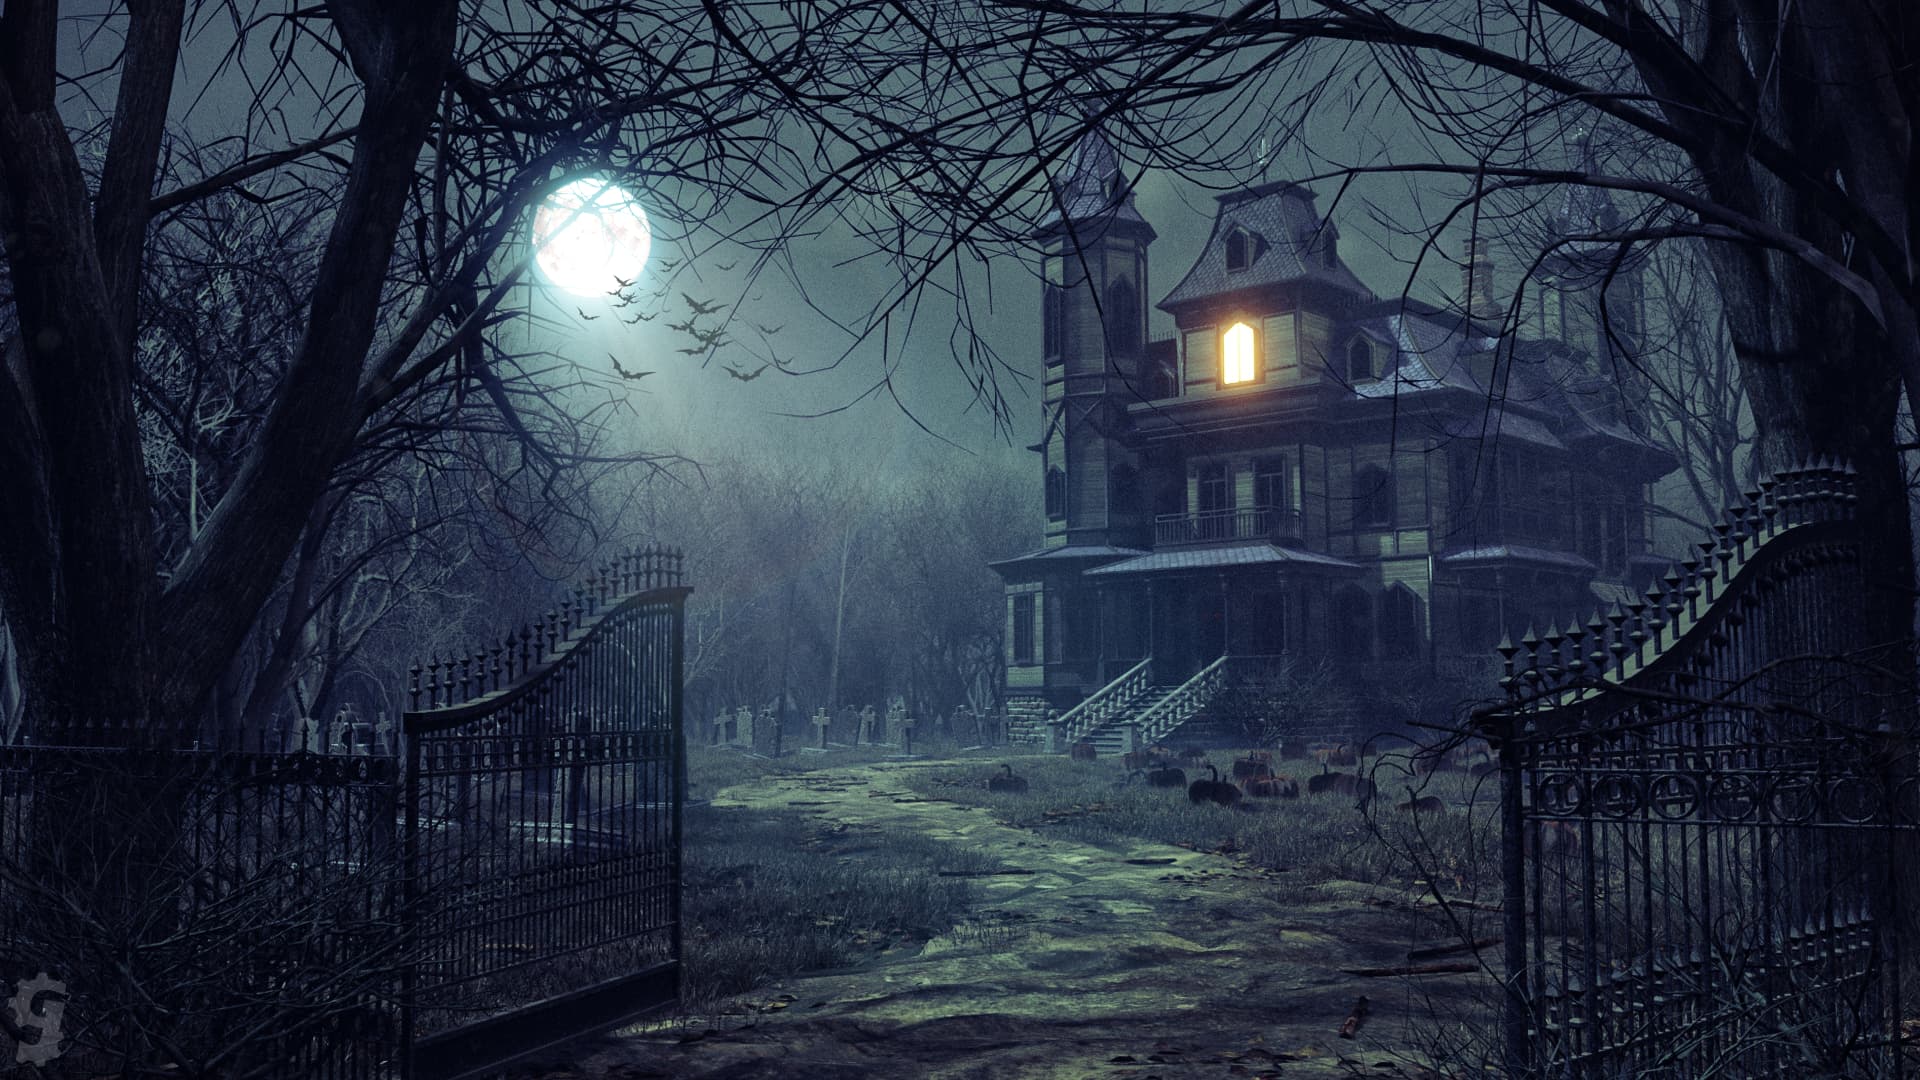 Haunted House - Finished Projects - Blender Artists Community